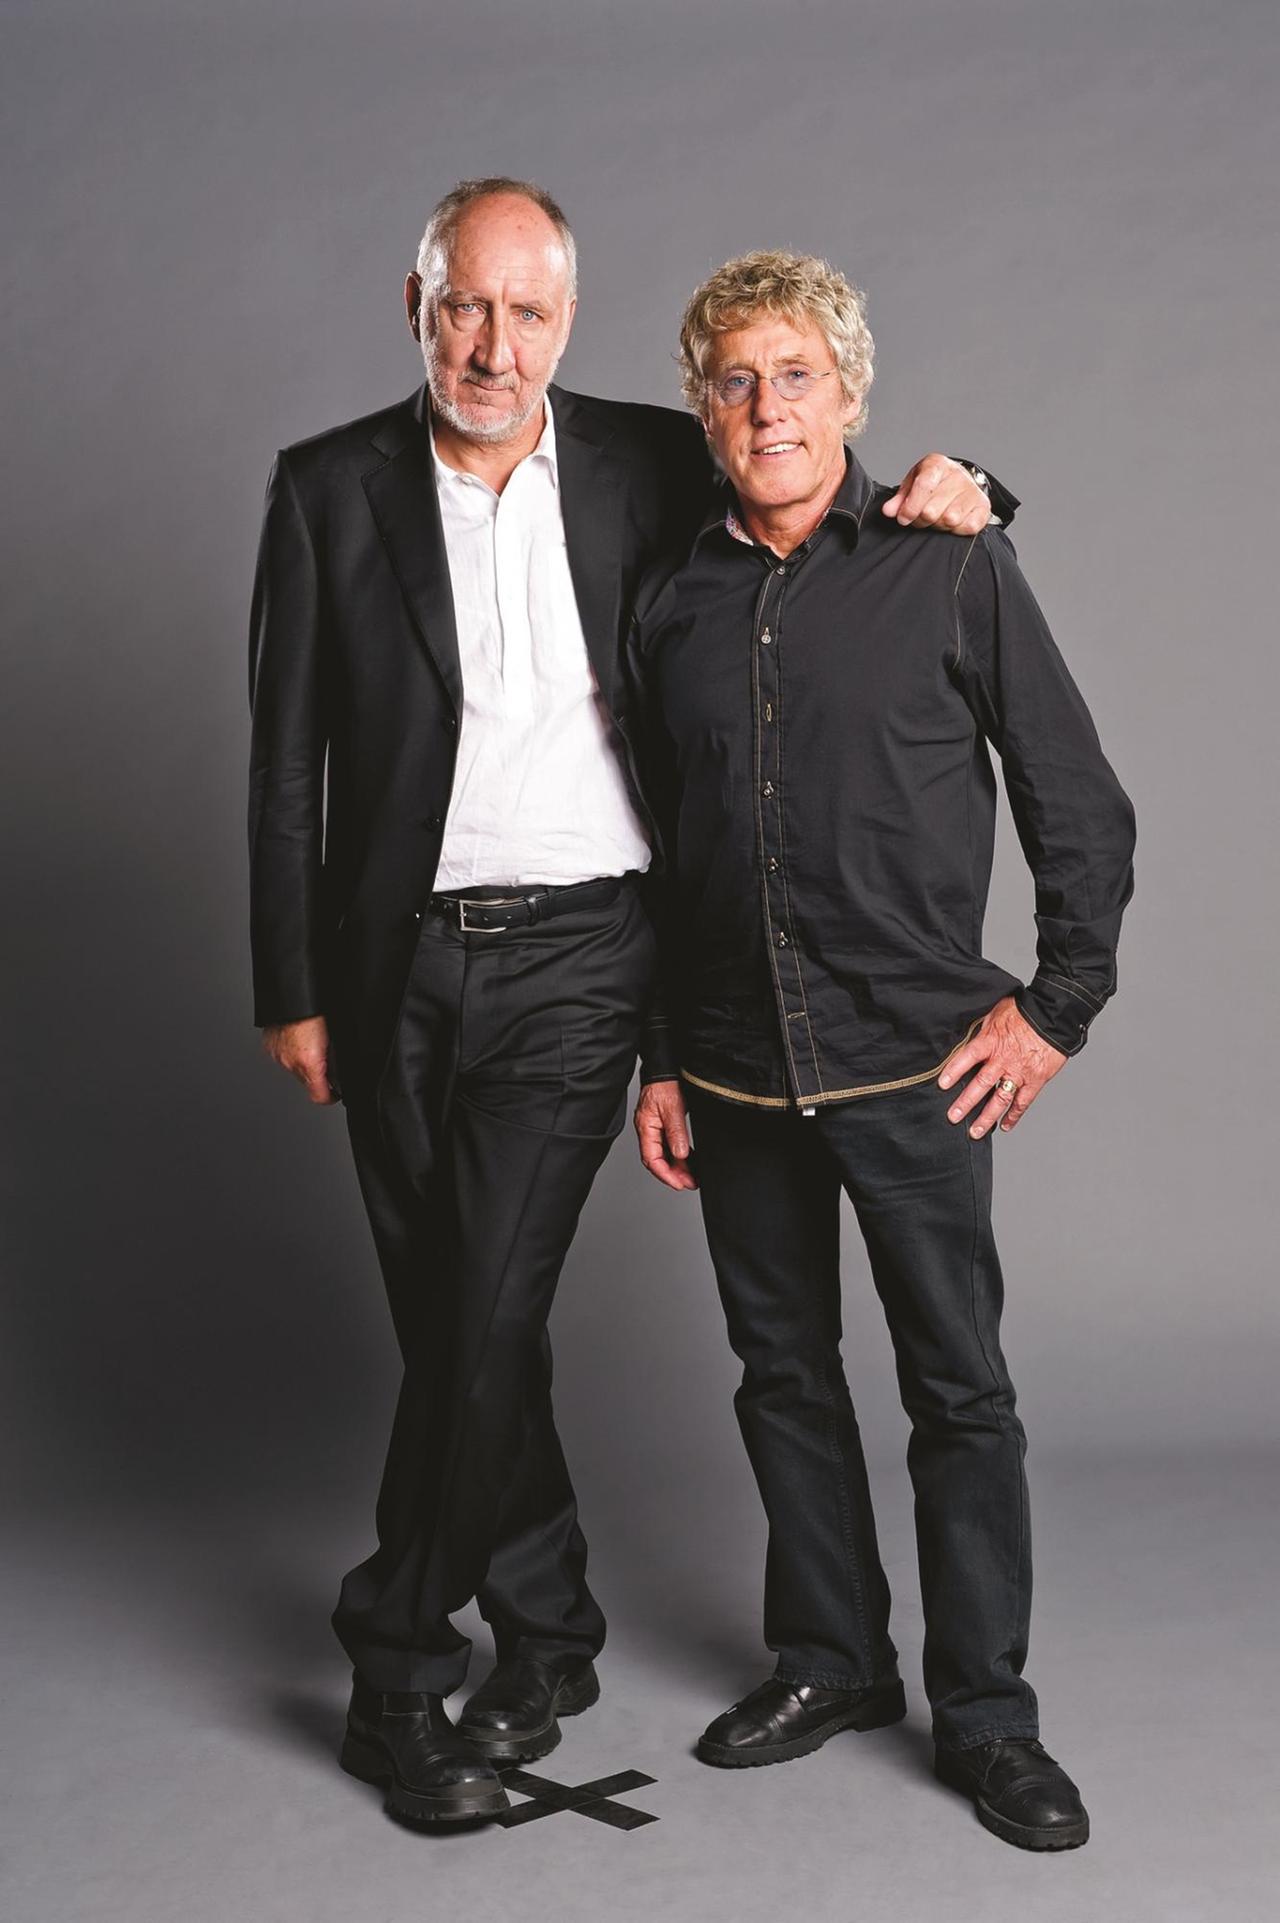 Pete Townshend & Roger Daltrey Arm in Arm